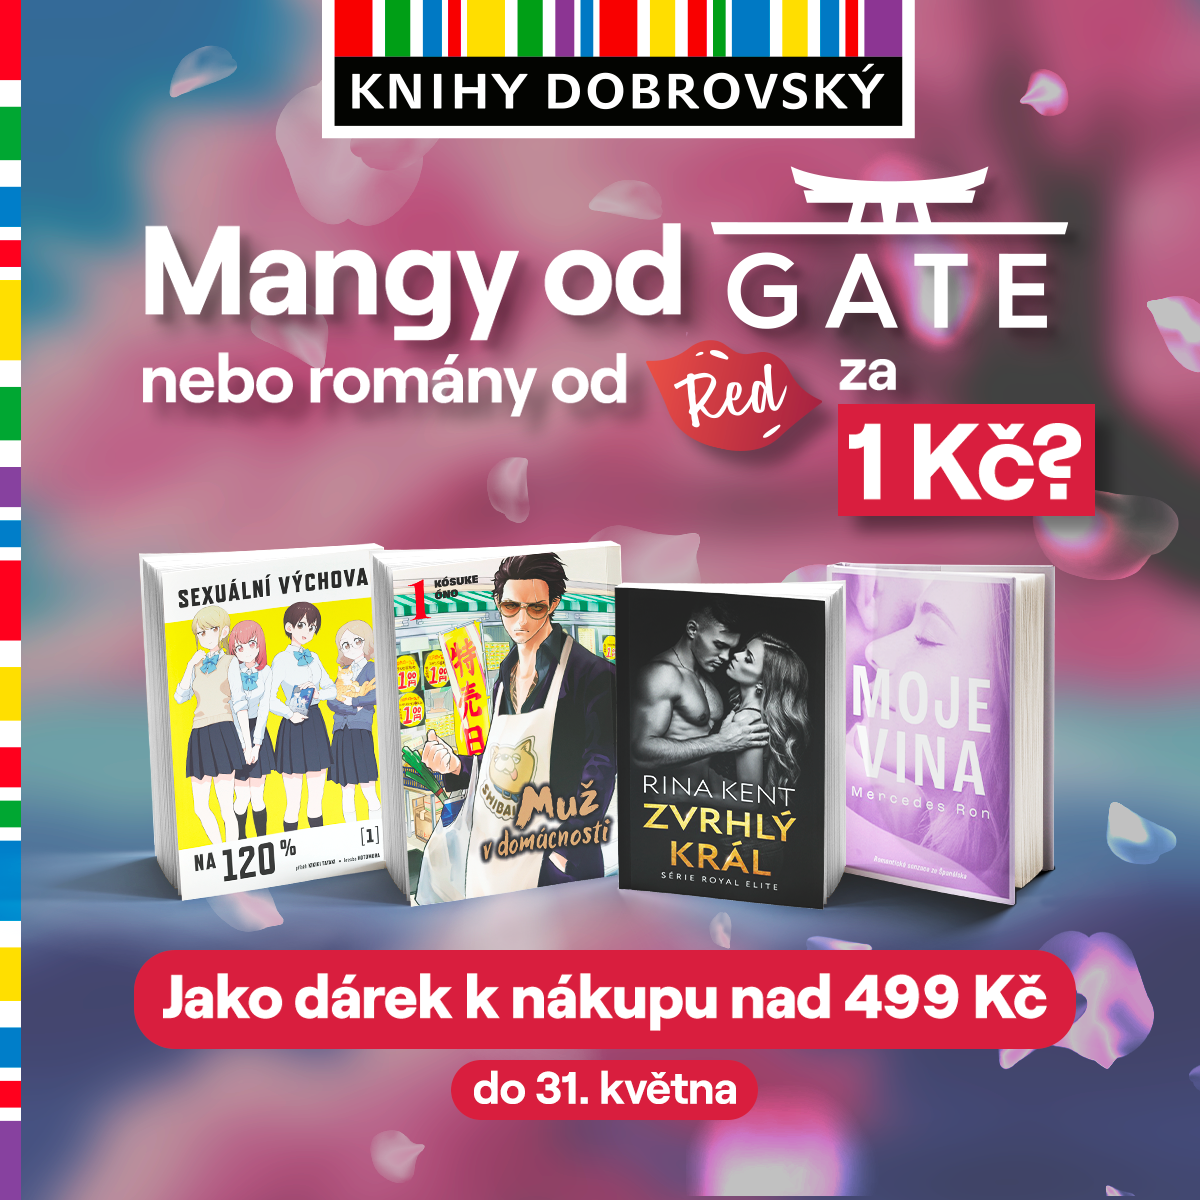 Manga by Gate or Redovka for 1 CZK